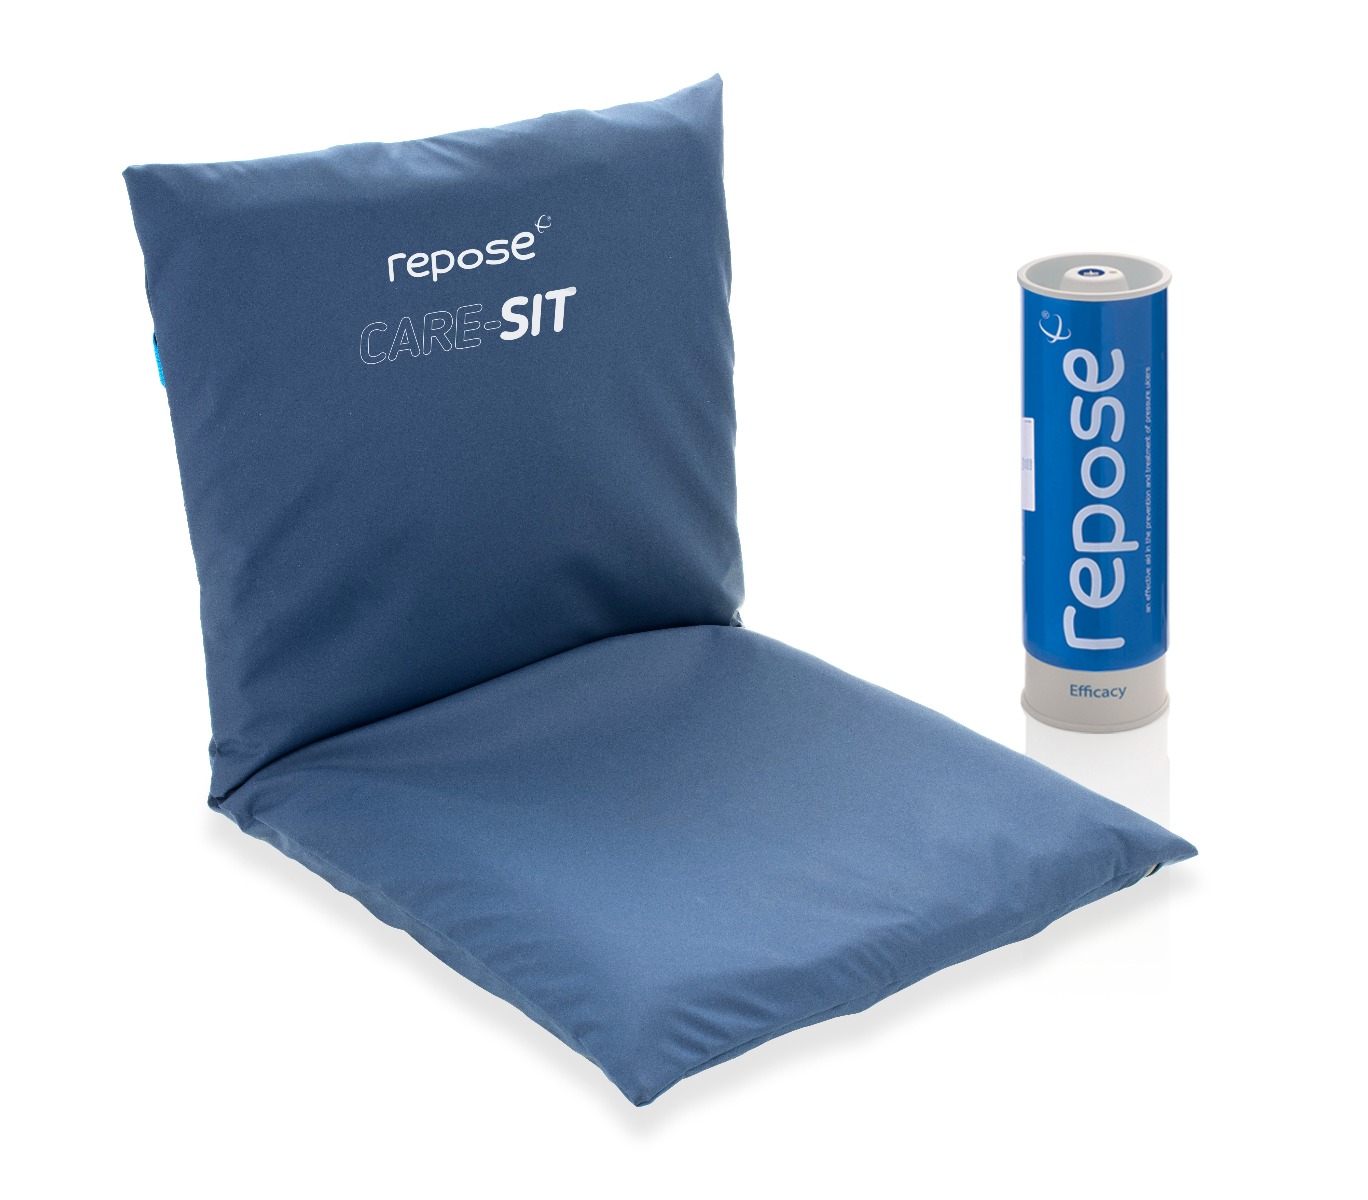 Repose Care - Sit Cover and Pump (400mm)